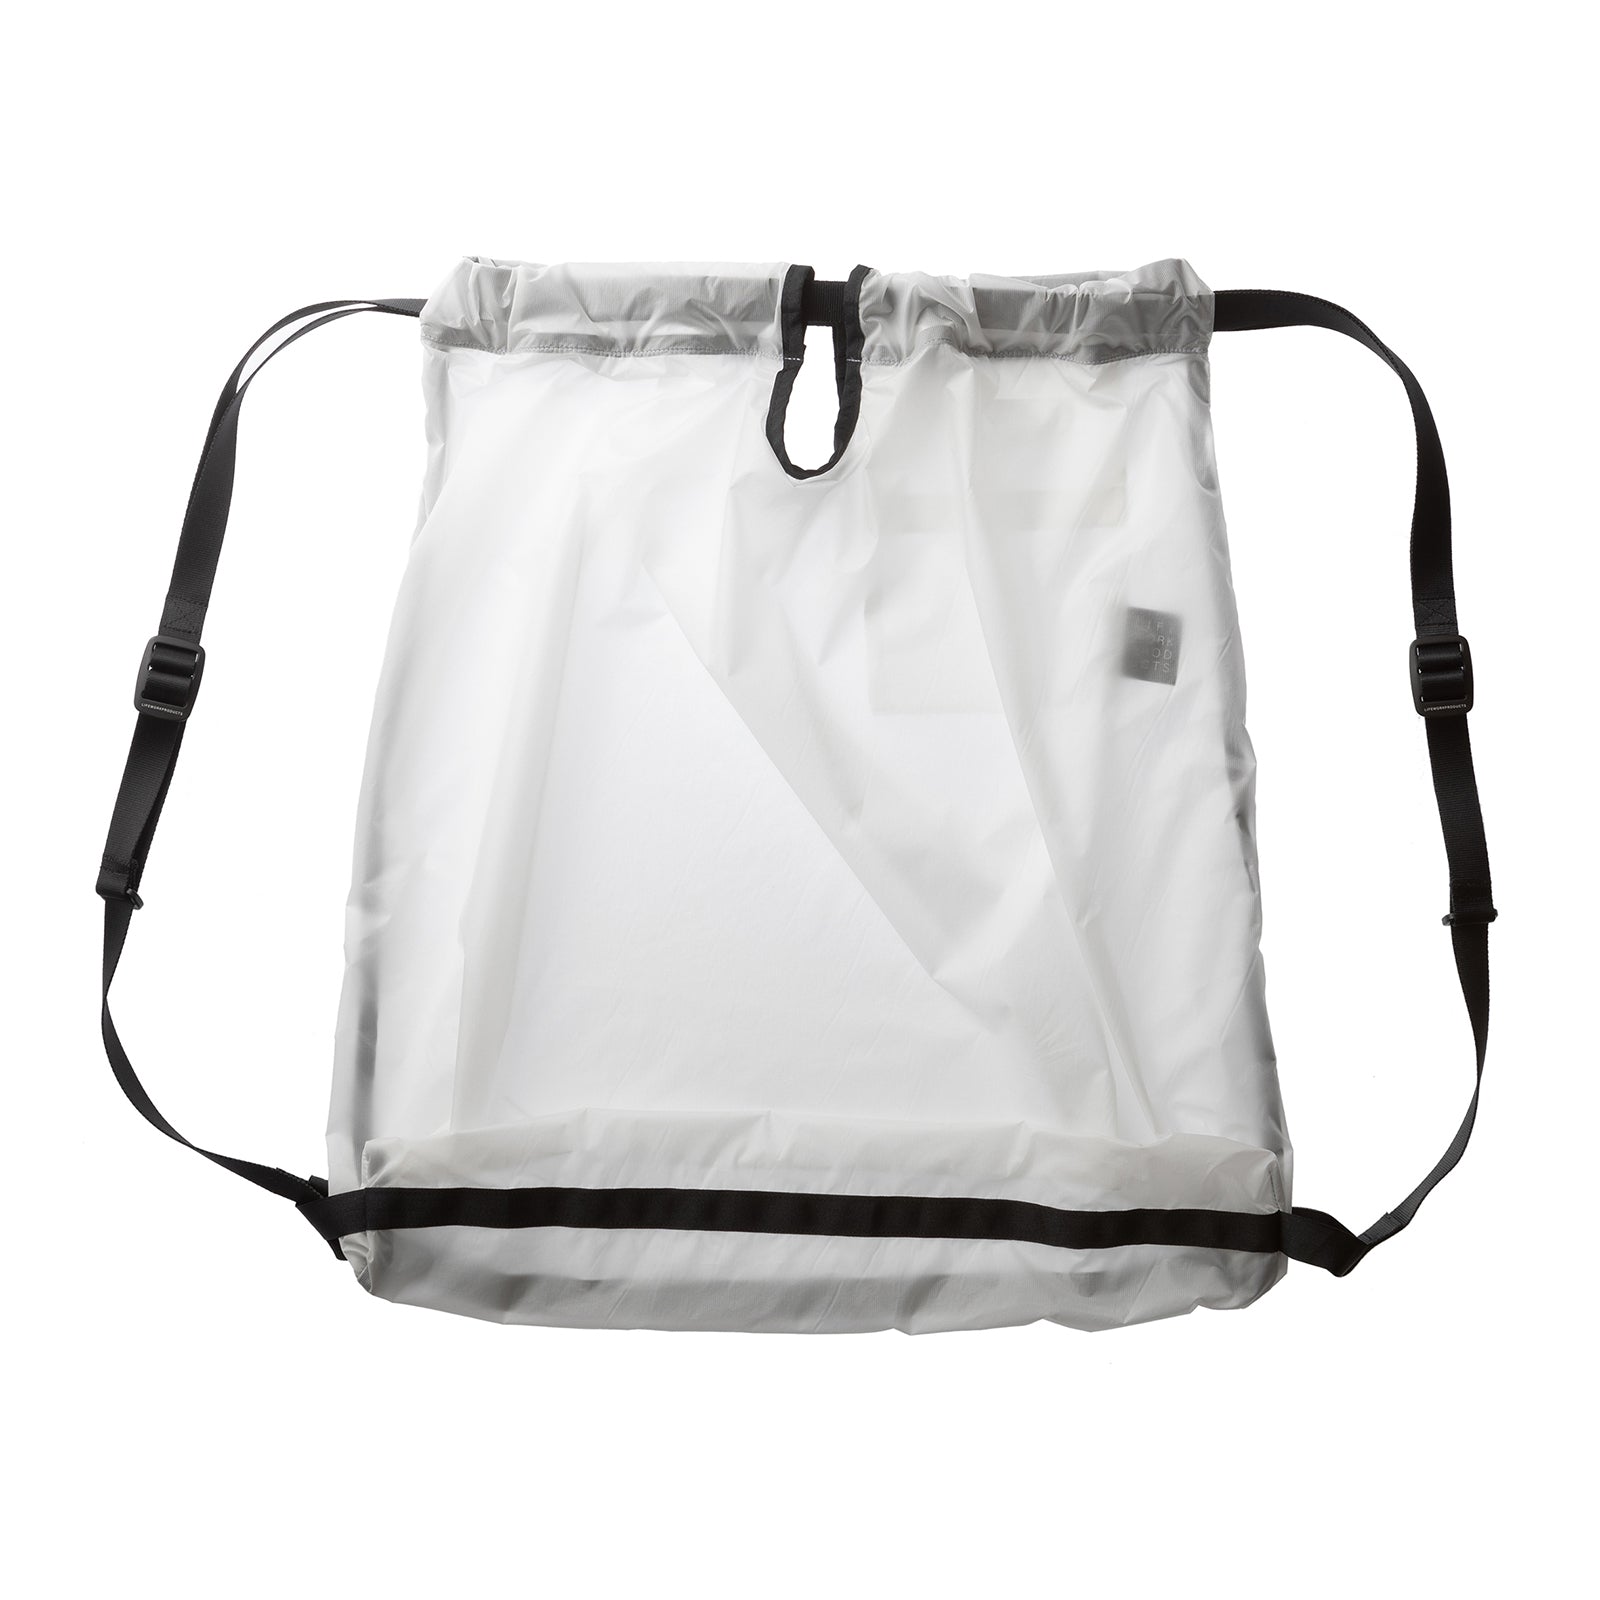 Ultimatelight 20L Backpack Tote (White)｜LIFEWORKPRODUCTS（ライフワークプロダクツ）